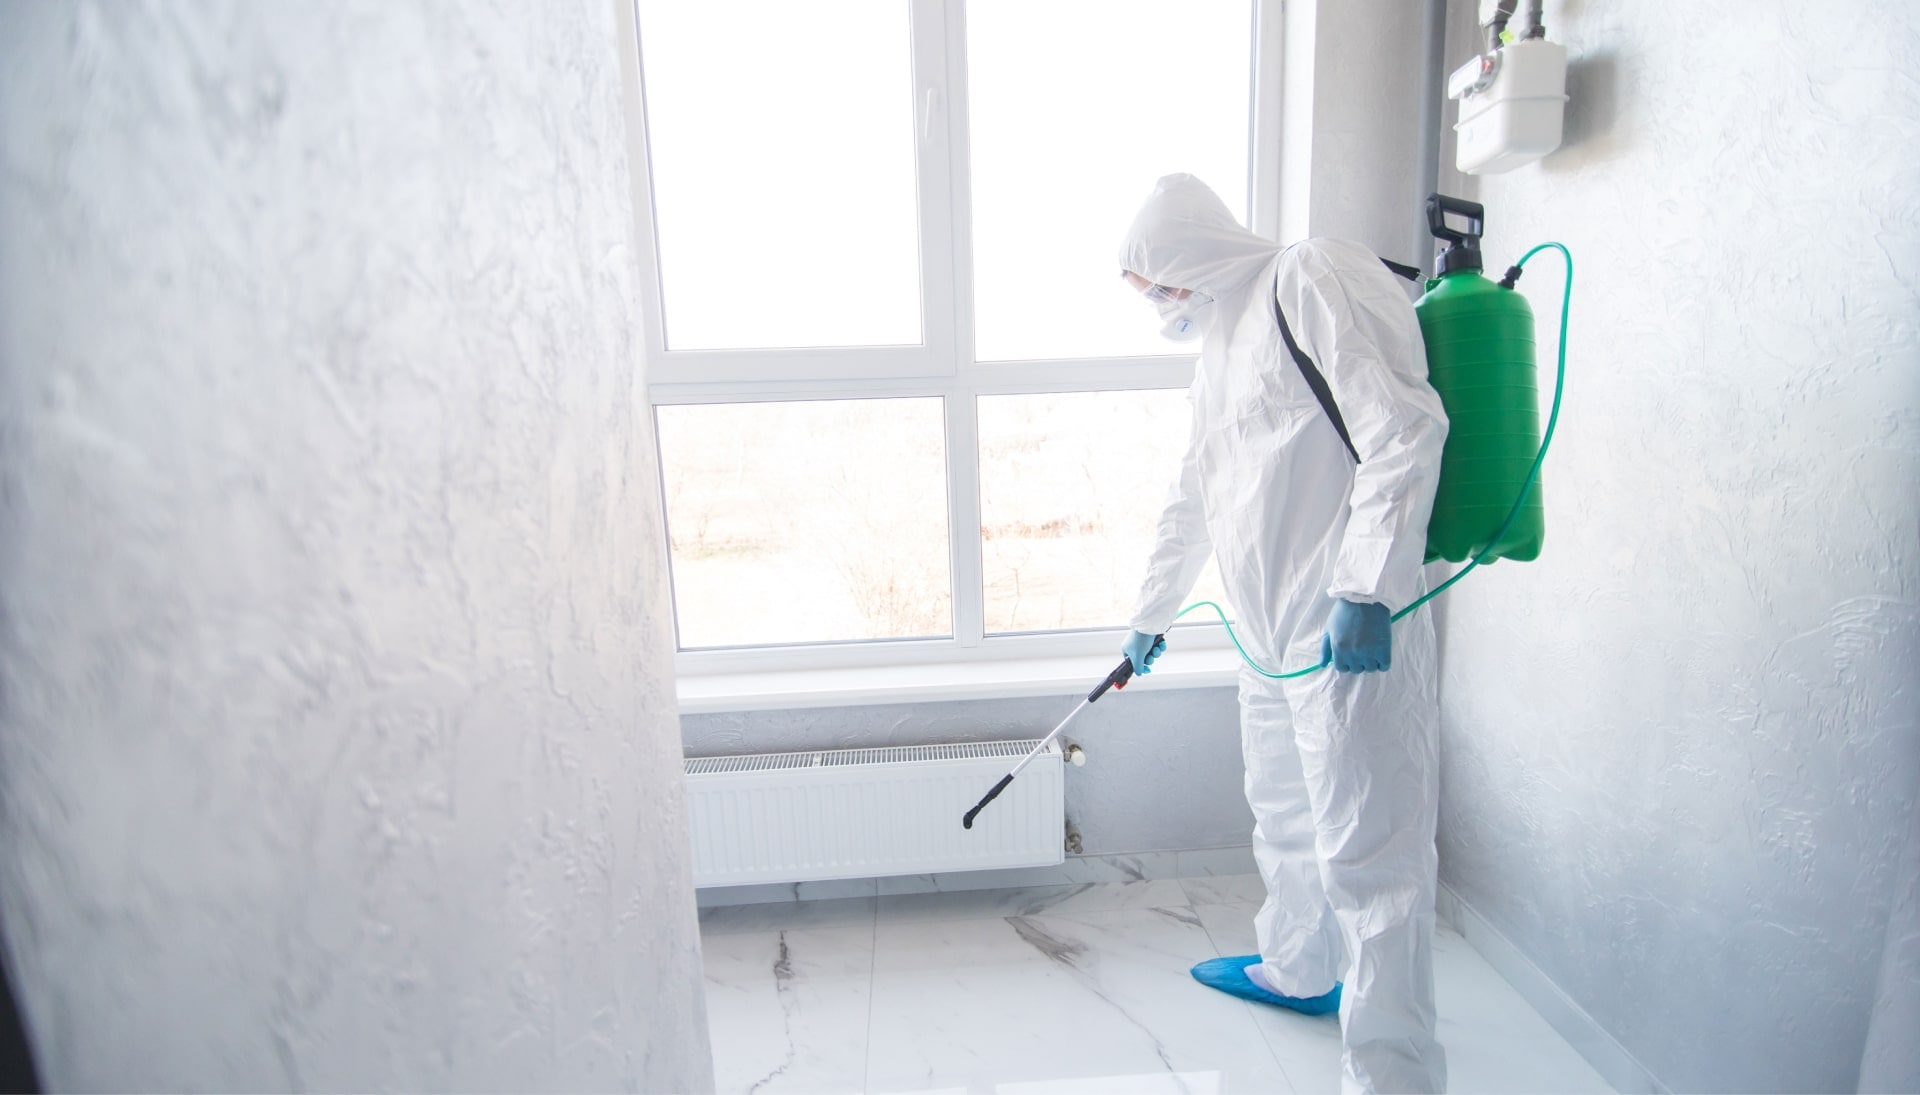 We provide the highest-quality mold inspection, testing, and removal services in the Plano, Texas area.